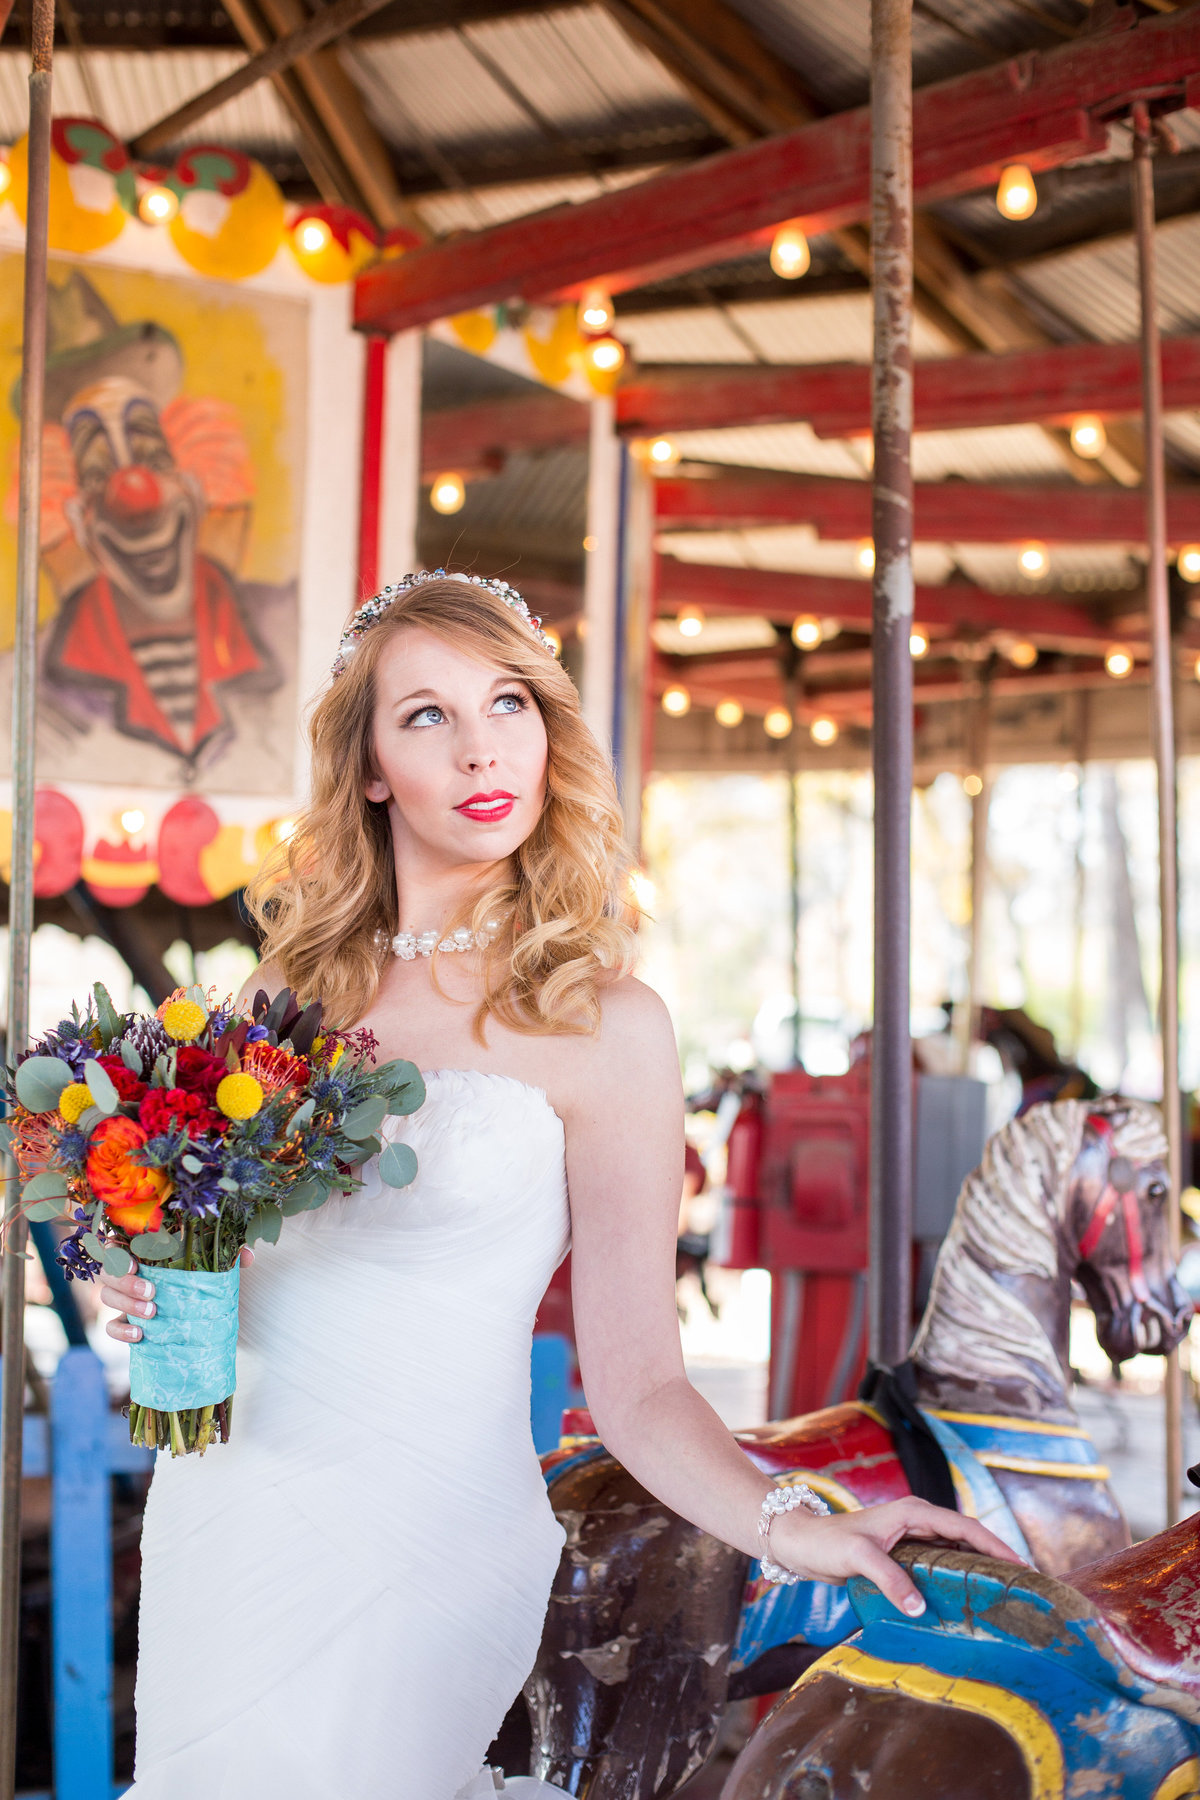 San Antonio wedding photography picture of bride on carousel at Kiddie Park taken by Expose The Heart